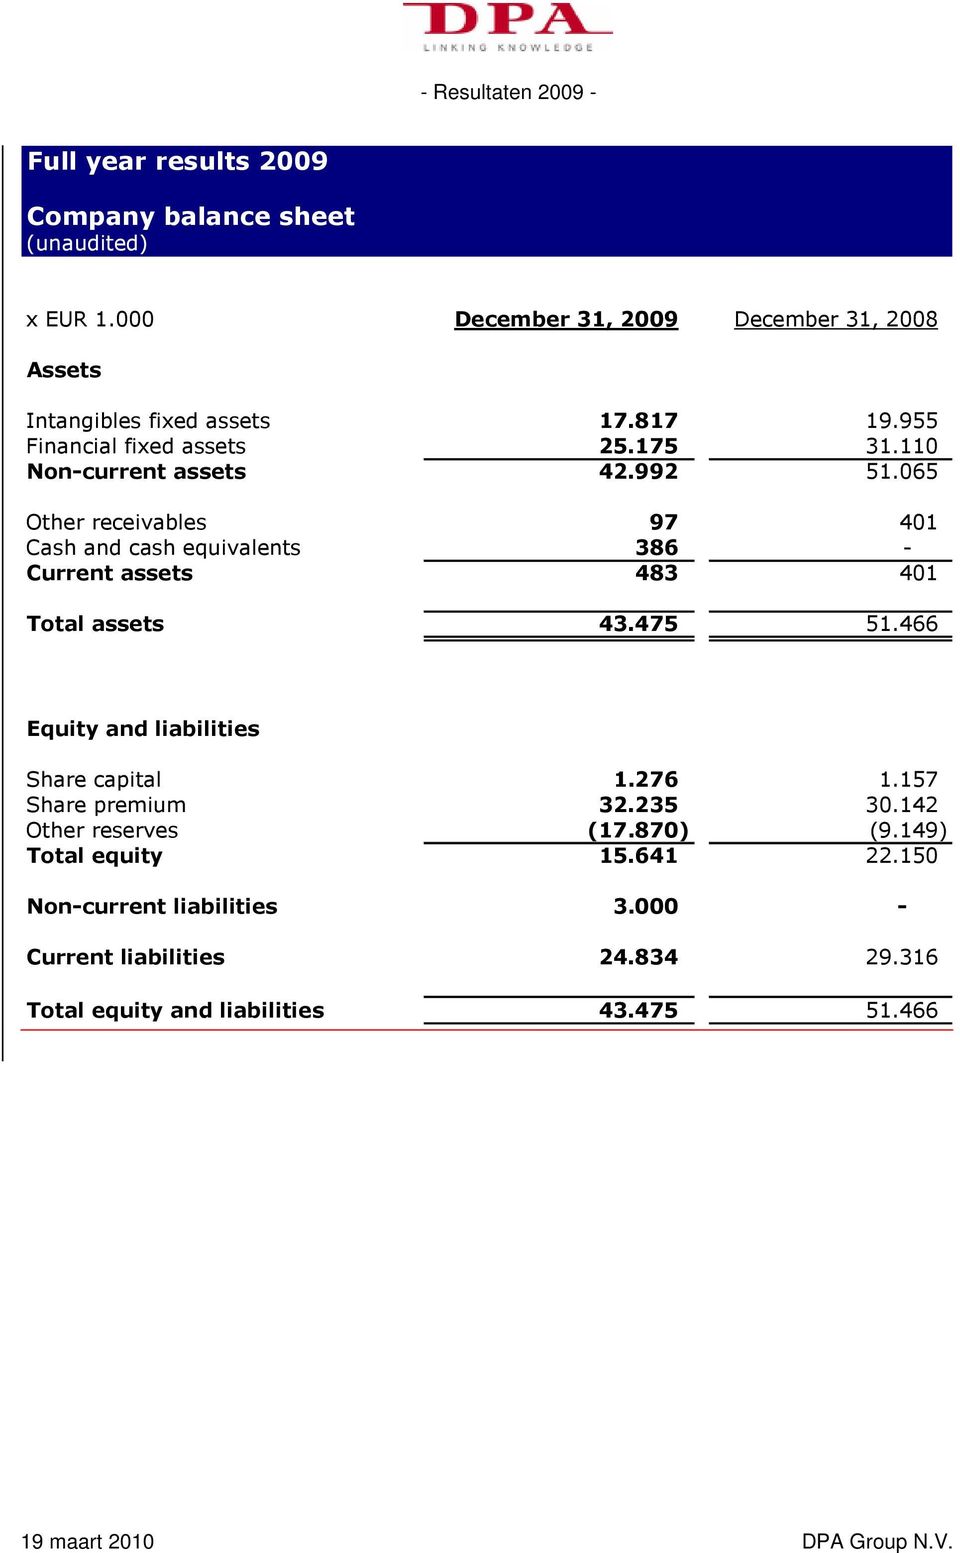 065 Other receivables 97 401 Cash and cash equivalents 386 - Current assets 483 401 Total assets 43.475 51.466 Equity and liabilities Share capital 1.